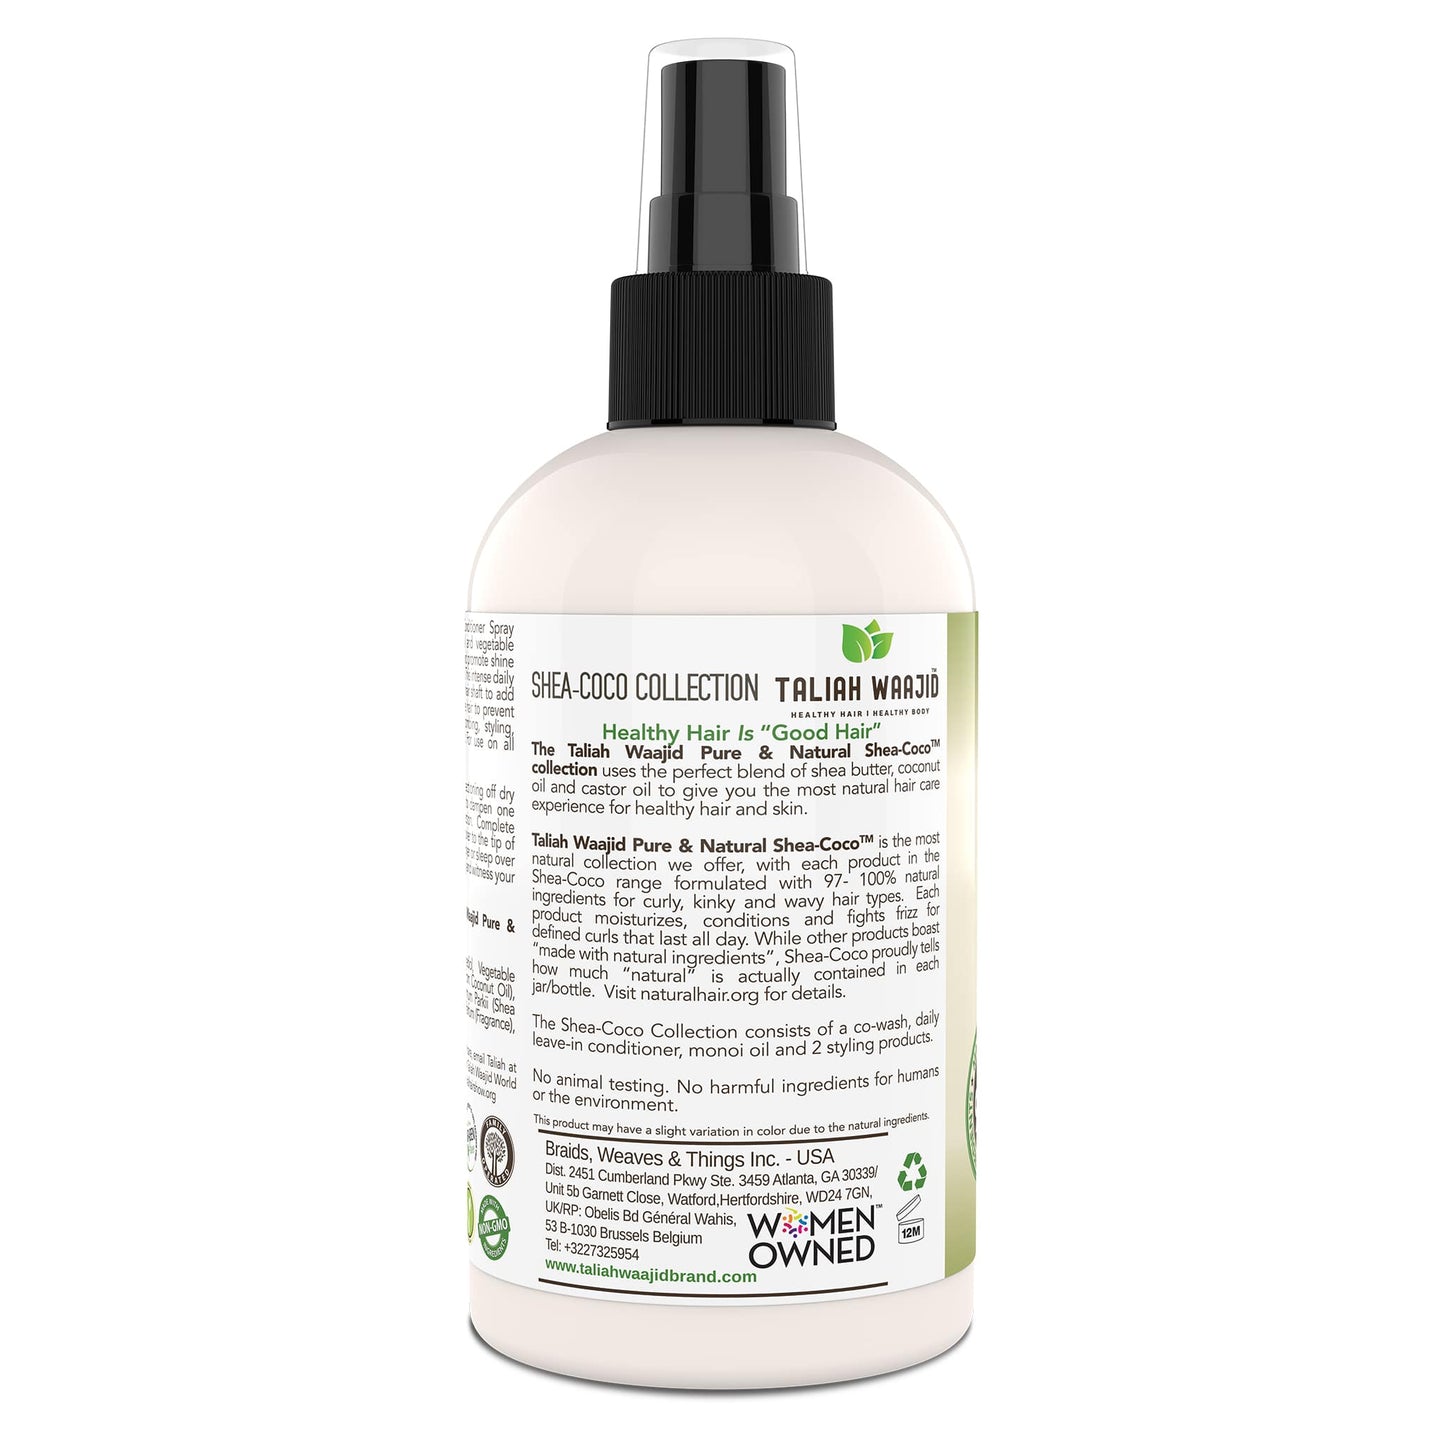 Taliah Waajid Shea Coco Condition Daily Leave-In Conditioner